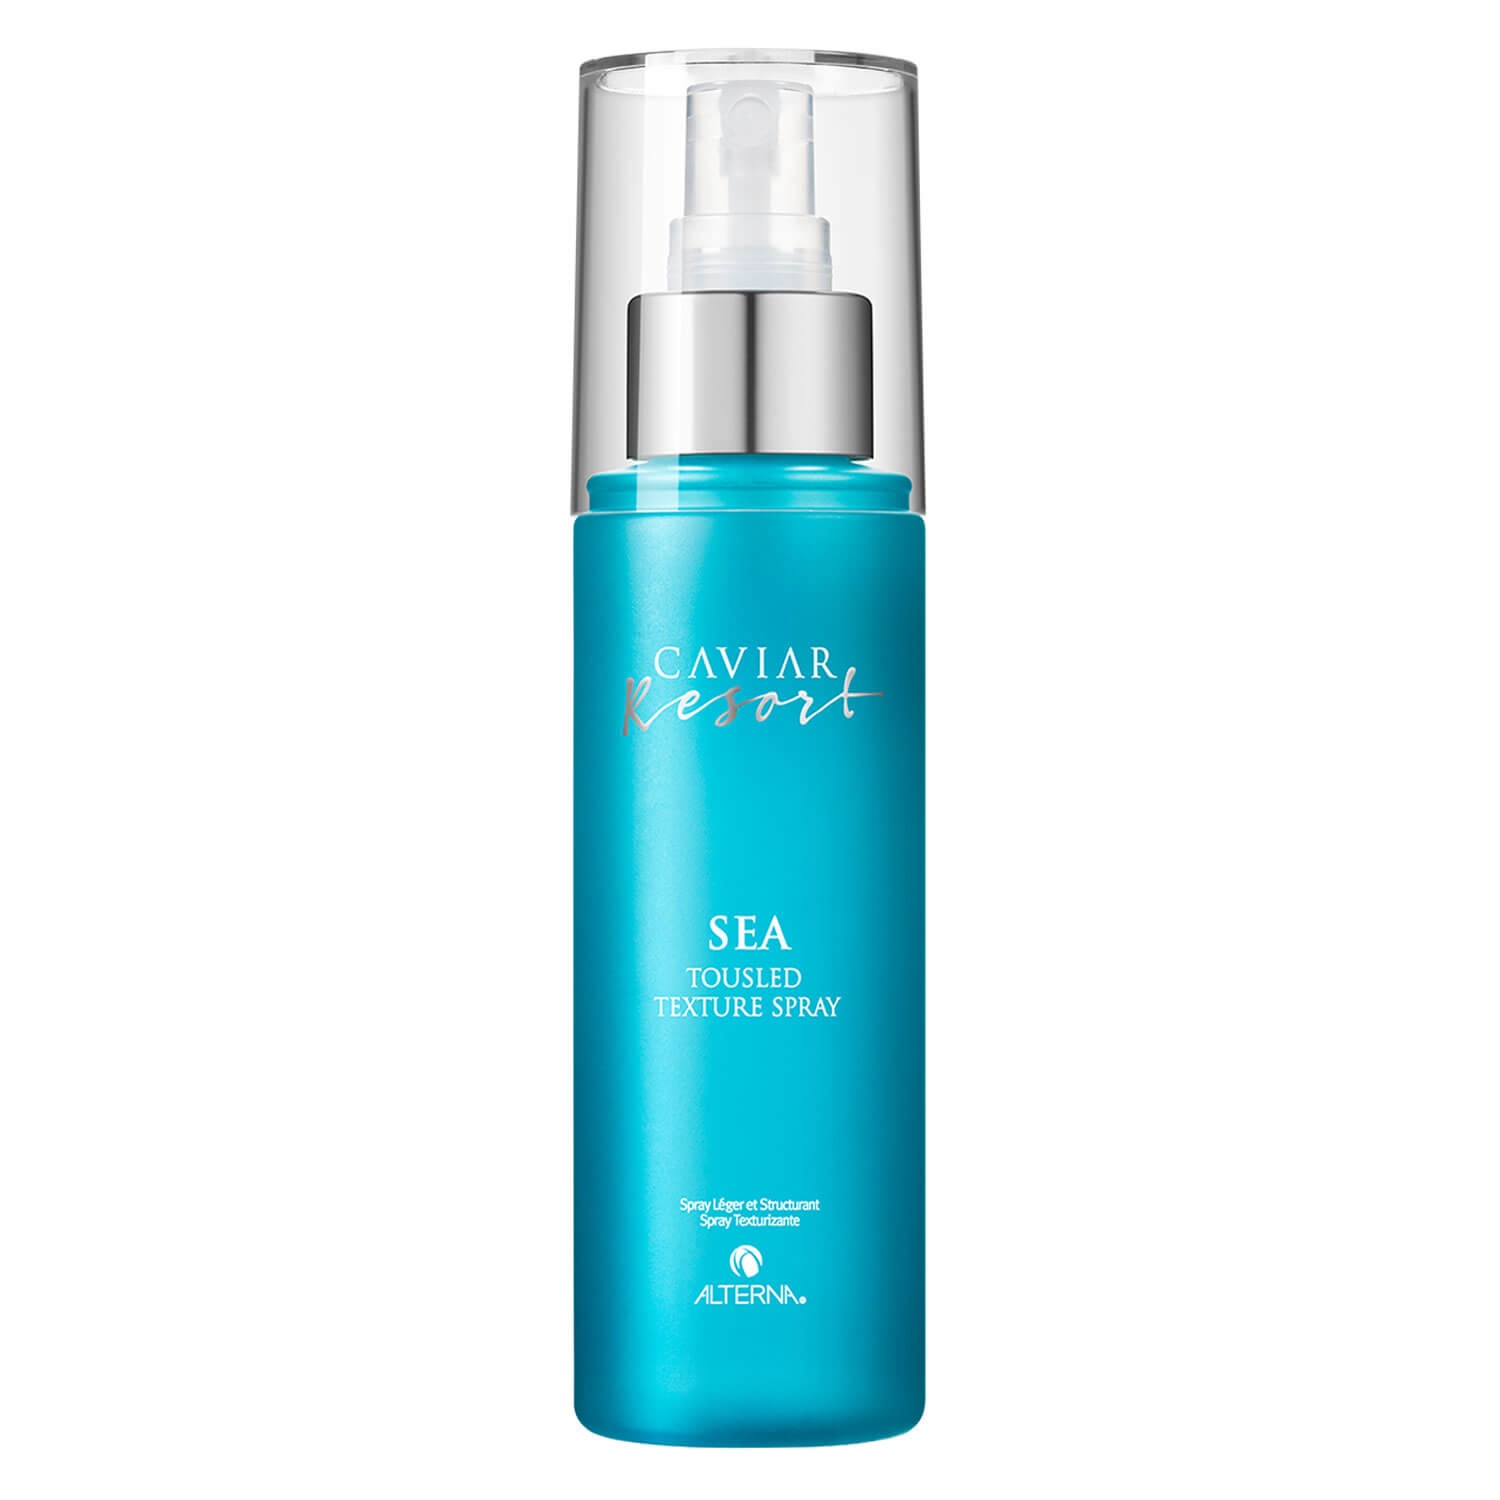 Product image from Caviar Resort - Sea Tousled Texture Spray